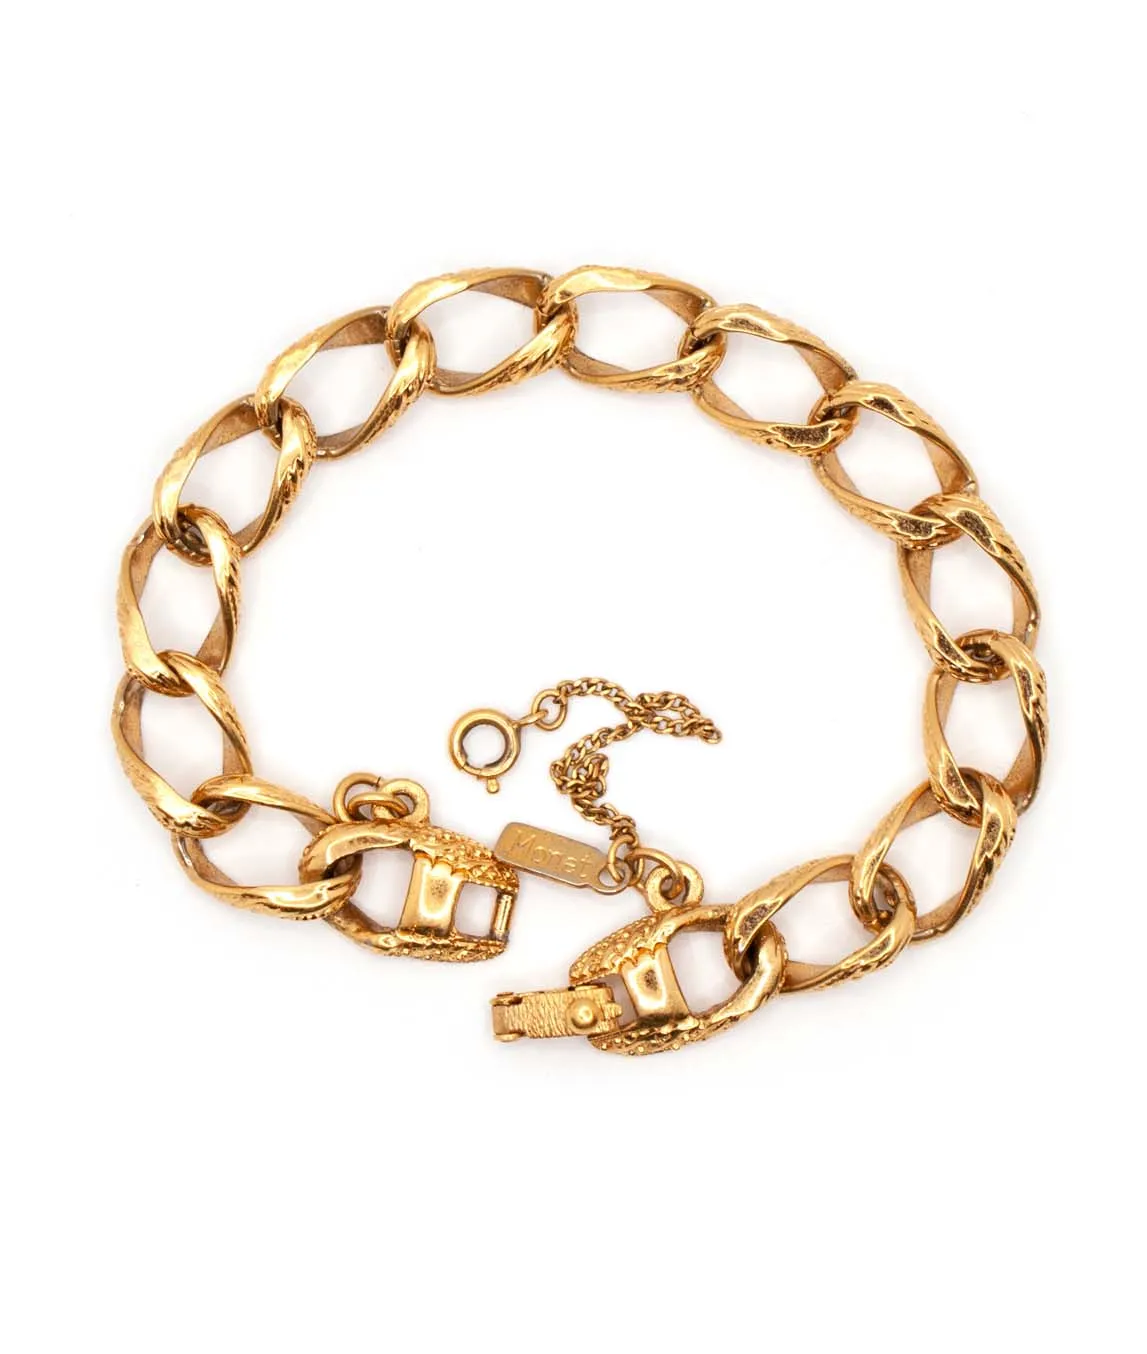 Gold tone vintage Monet charm link bracelet with safety chain top view